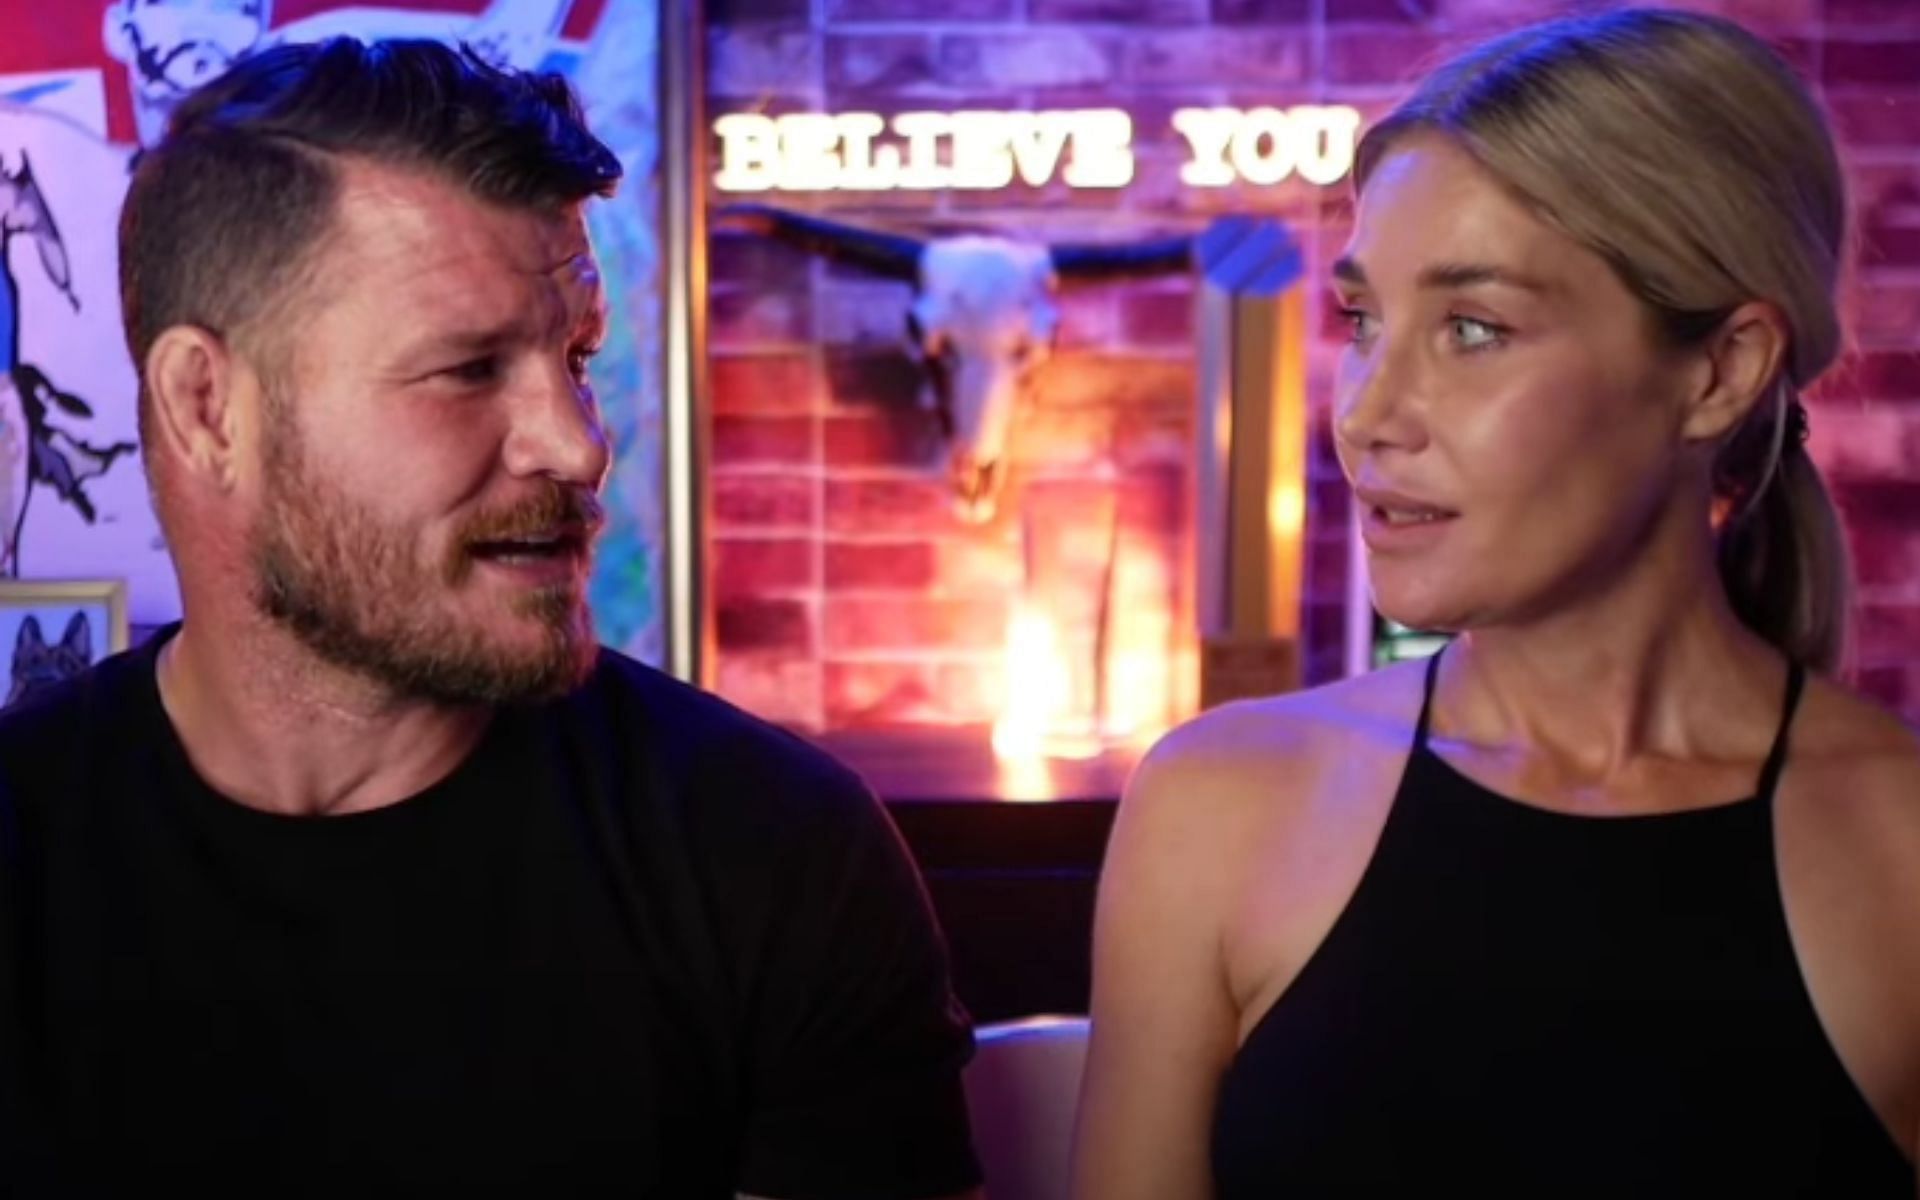 Michael Bisping (L) with his wife Rebecca (R) [Credits: BelieveYouMe Podcast/YouTube]